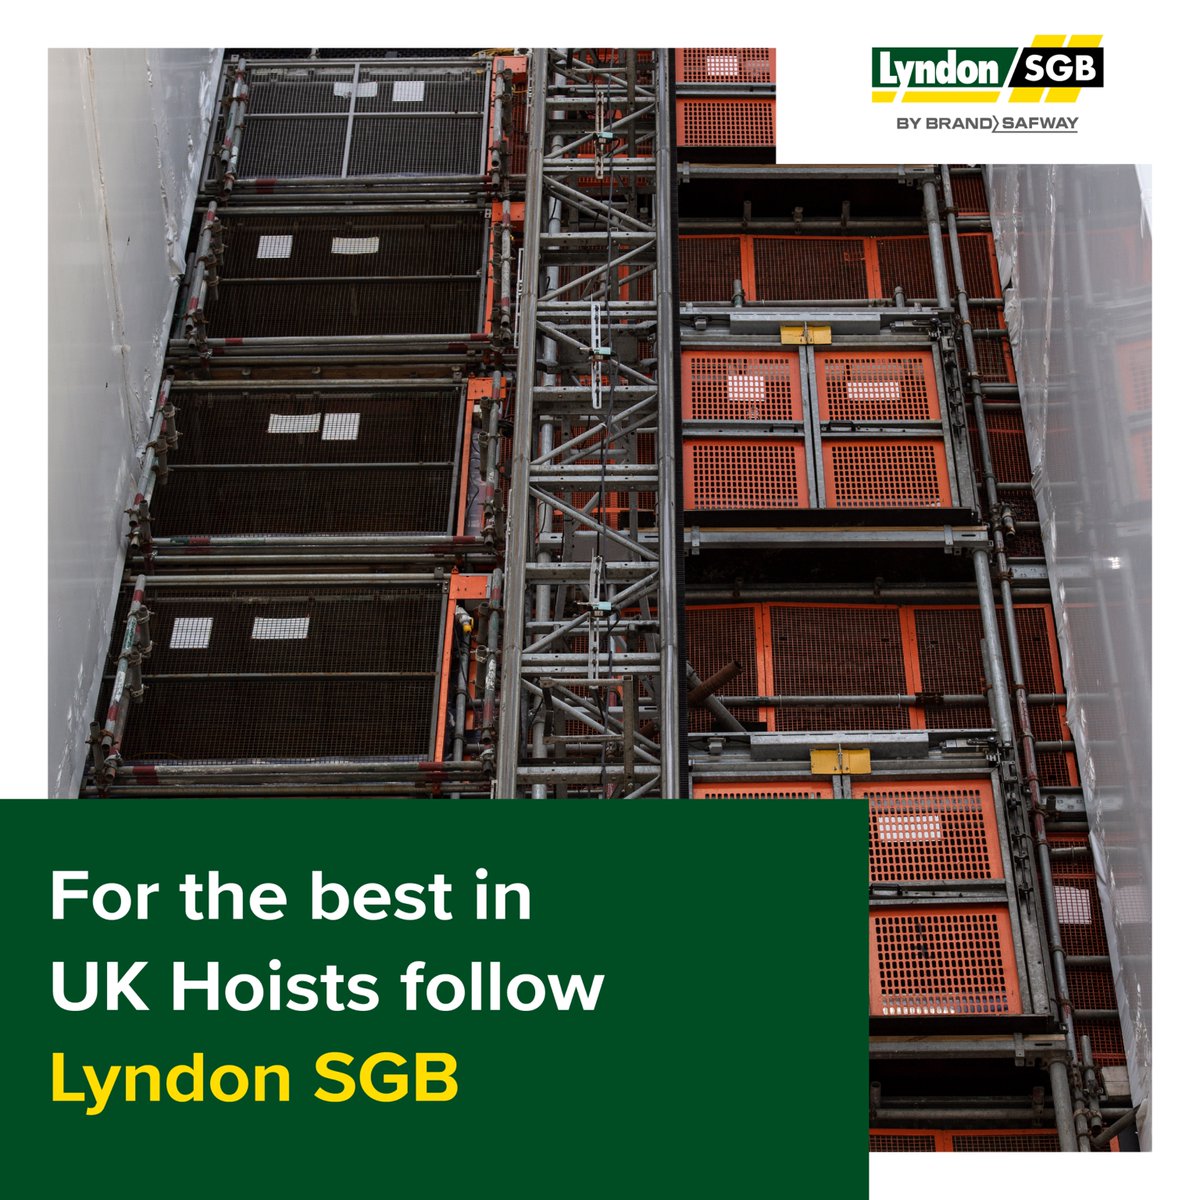 Contact the Lyndon SGB Hoists team for more details on our award-winning fleet of #construction hoists 🏗️ 📲 03333 448 450 📧 info@lyndon-sgb.co.uk Find out more about our #hoist brand in our brochure 👨🏻‍💻 ow.ly/RZig50RhQ1L #LyndonSGB #WeAreOne #AtWorkForYou